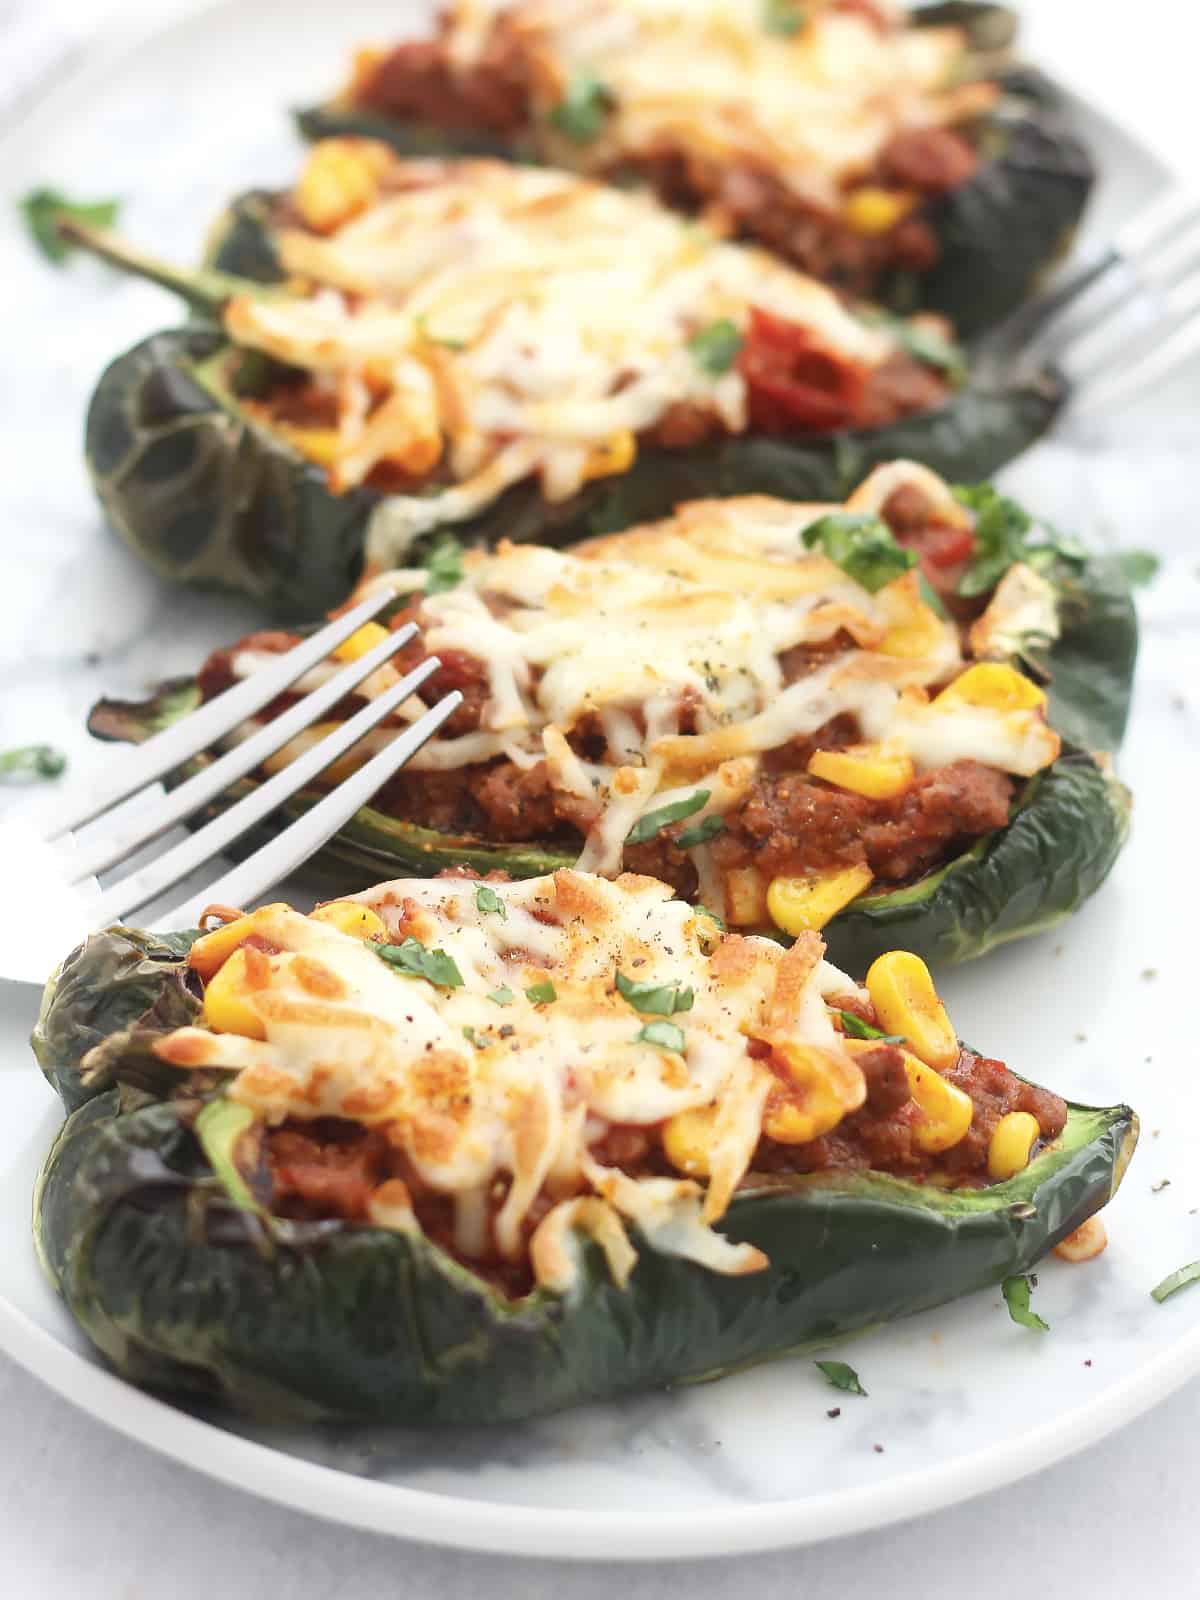 Filled poblano pepper halves topped with melted cheese.